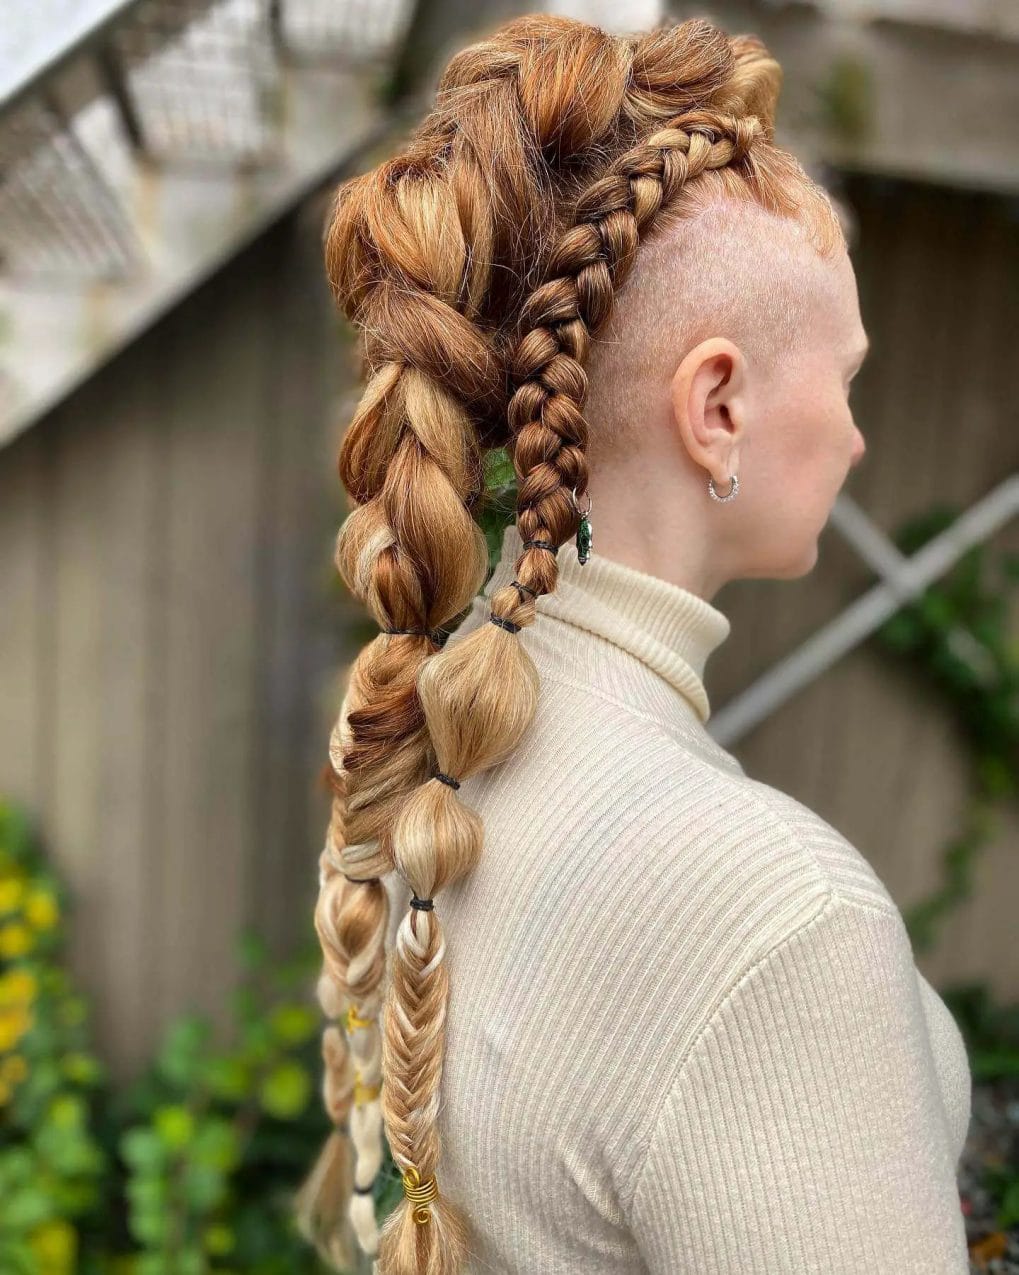 Honey-blonde Viking braids with a shaved side and bubbled sections.